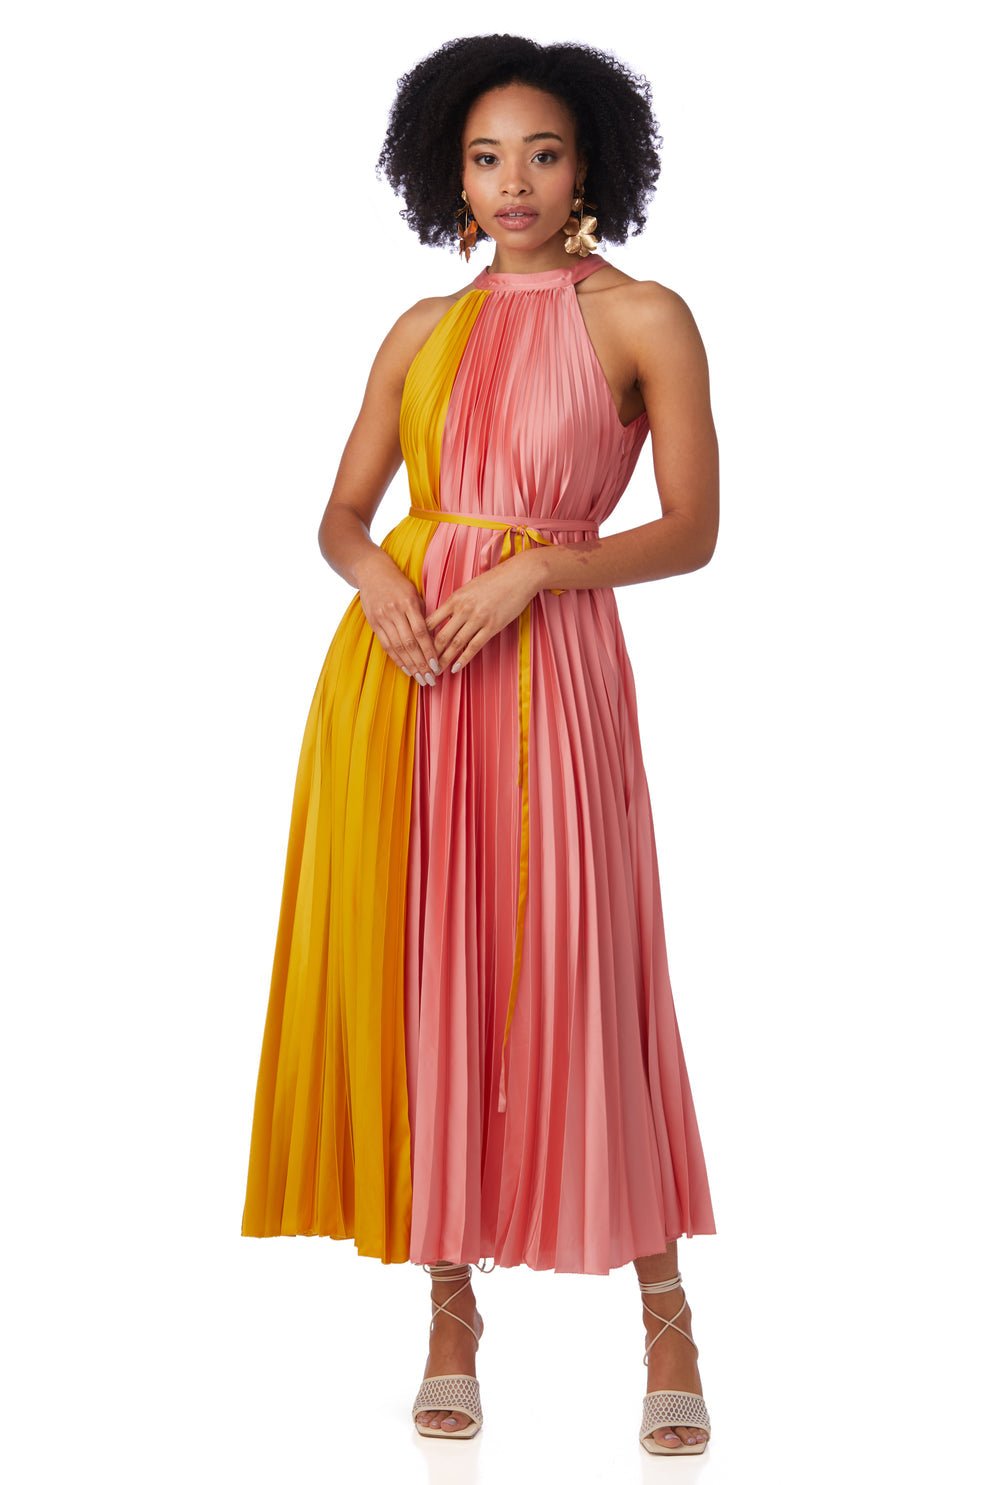 Crosby - June Sleeveless Maxi Pleated Dress: Golden Hour Colorblock - Shorely Chic Boutique